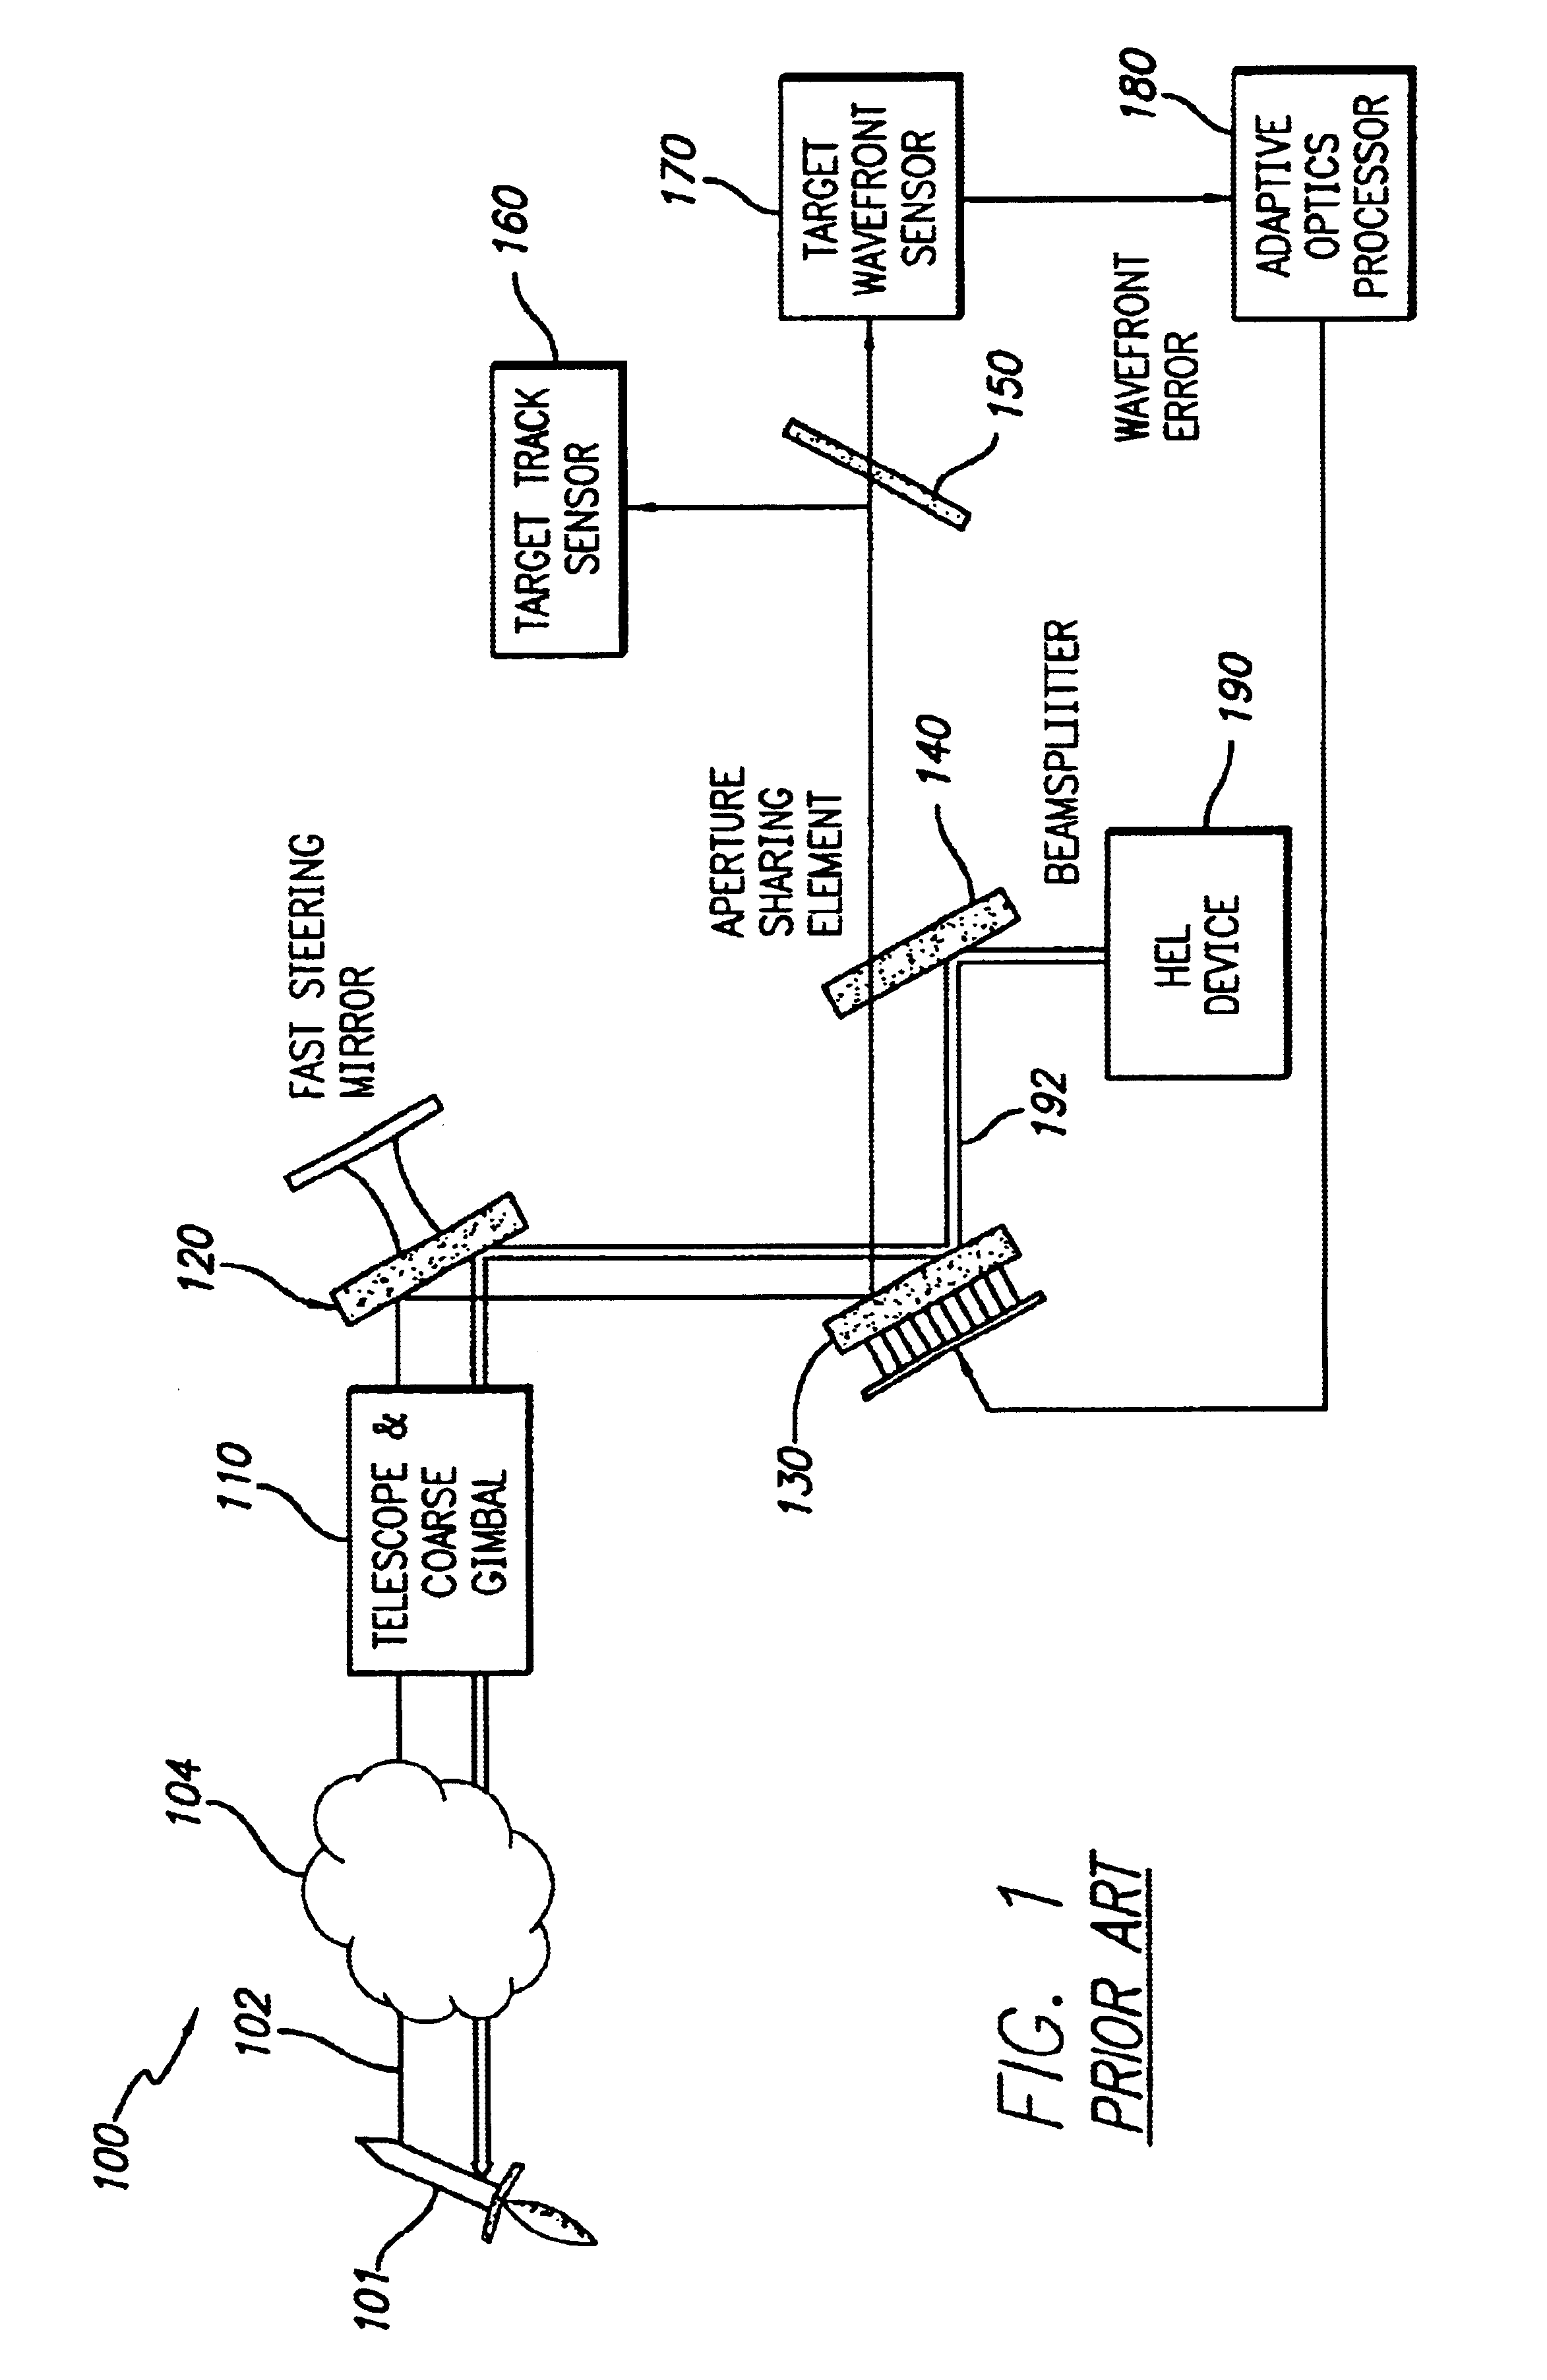 System and method for effecting high-power beam control with adaptive optics in low power beam path